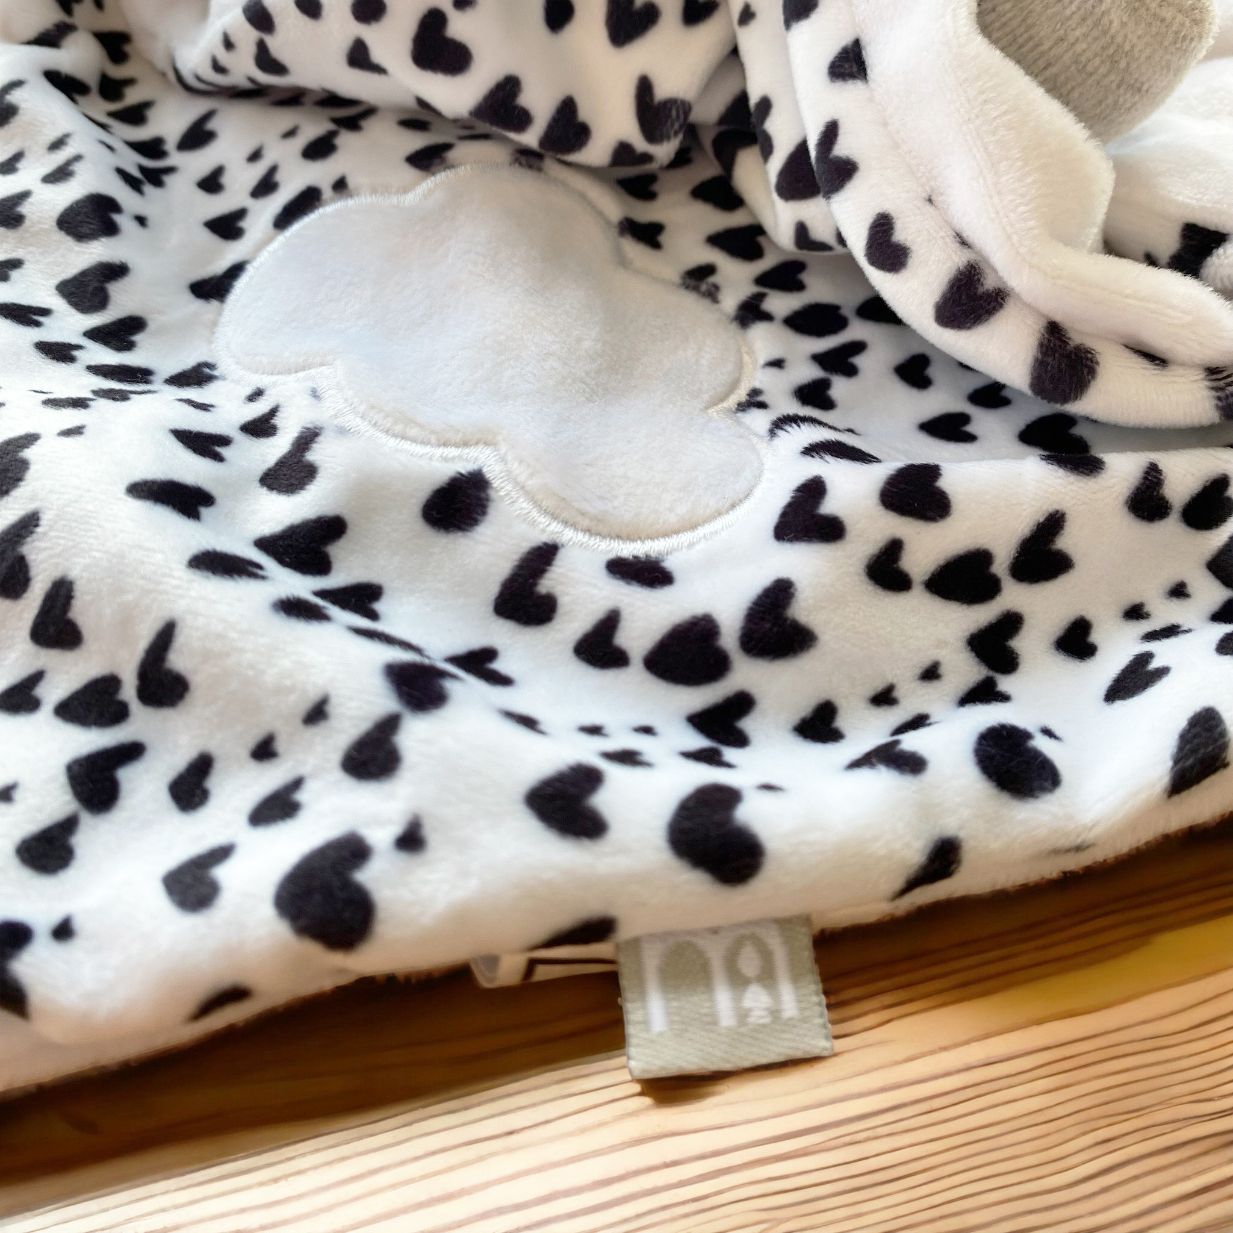 Mothercare Black and White Baby Raccoon Comforter